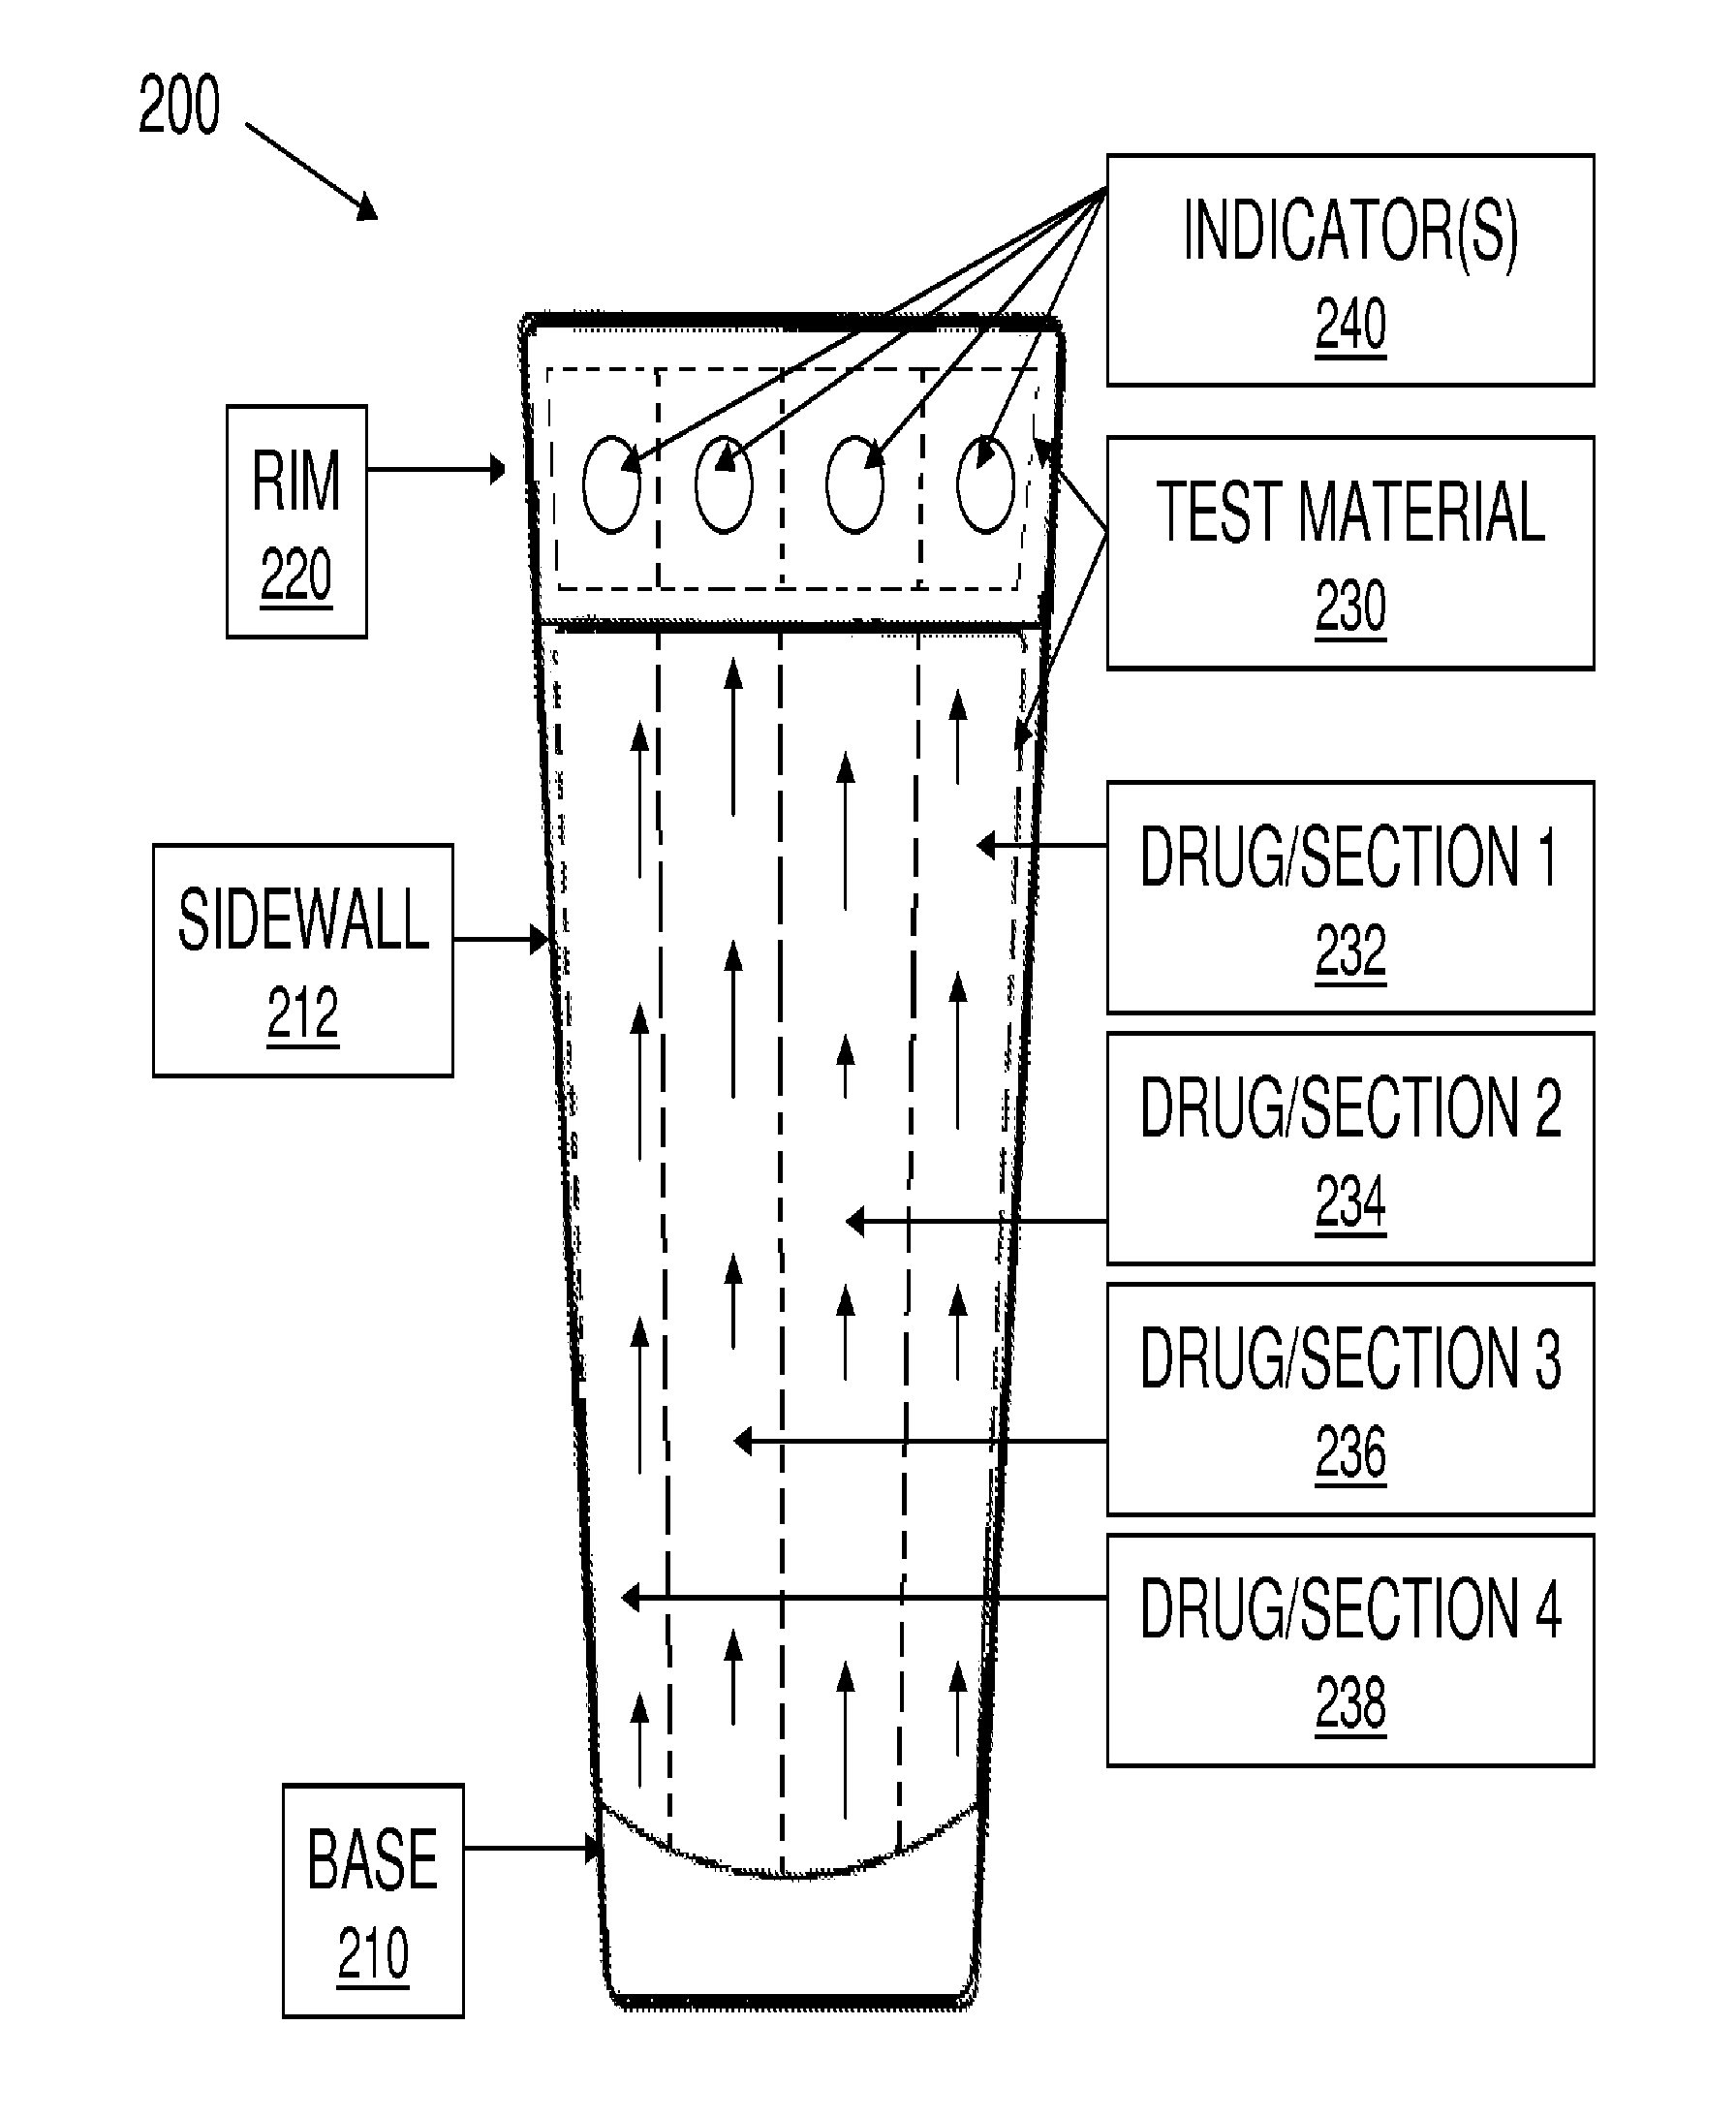 System and method for detection of a contaminated beverage